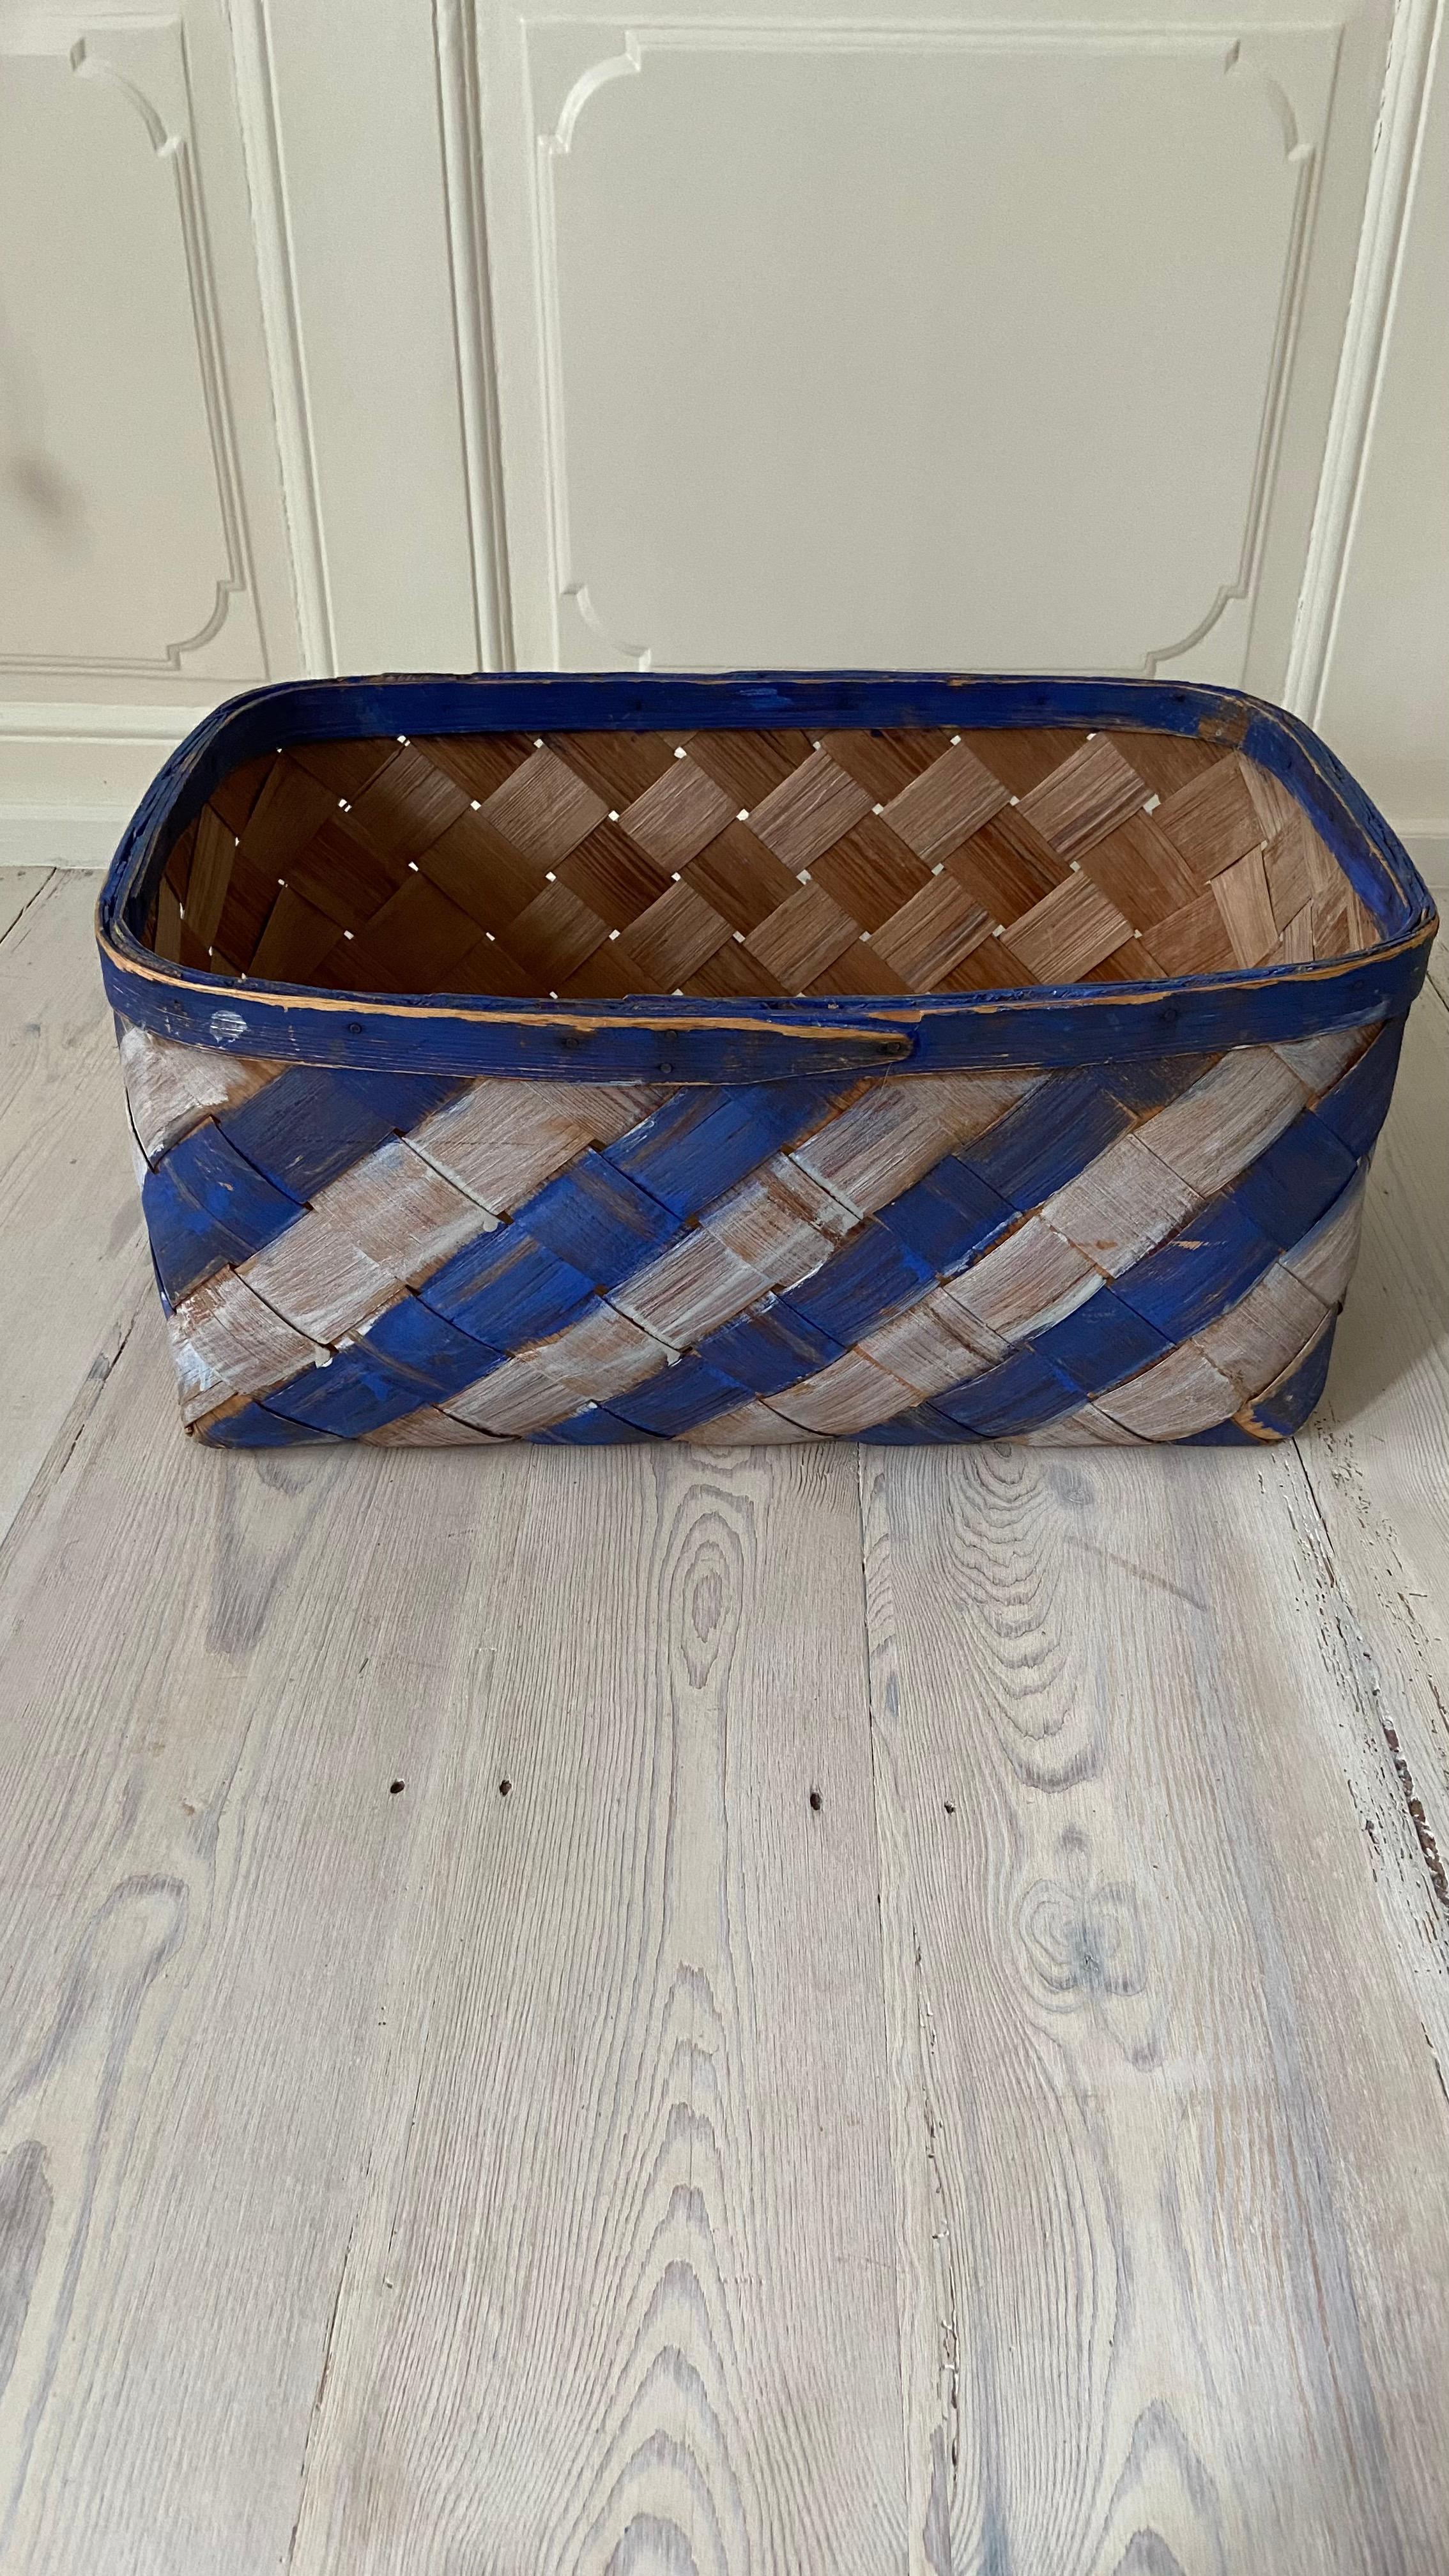 Bentwood Vintage Folk Art Basket with Blue and White Stripes, Sweden, Mid 19th-Century For Sale